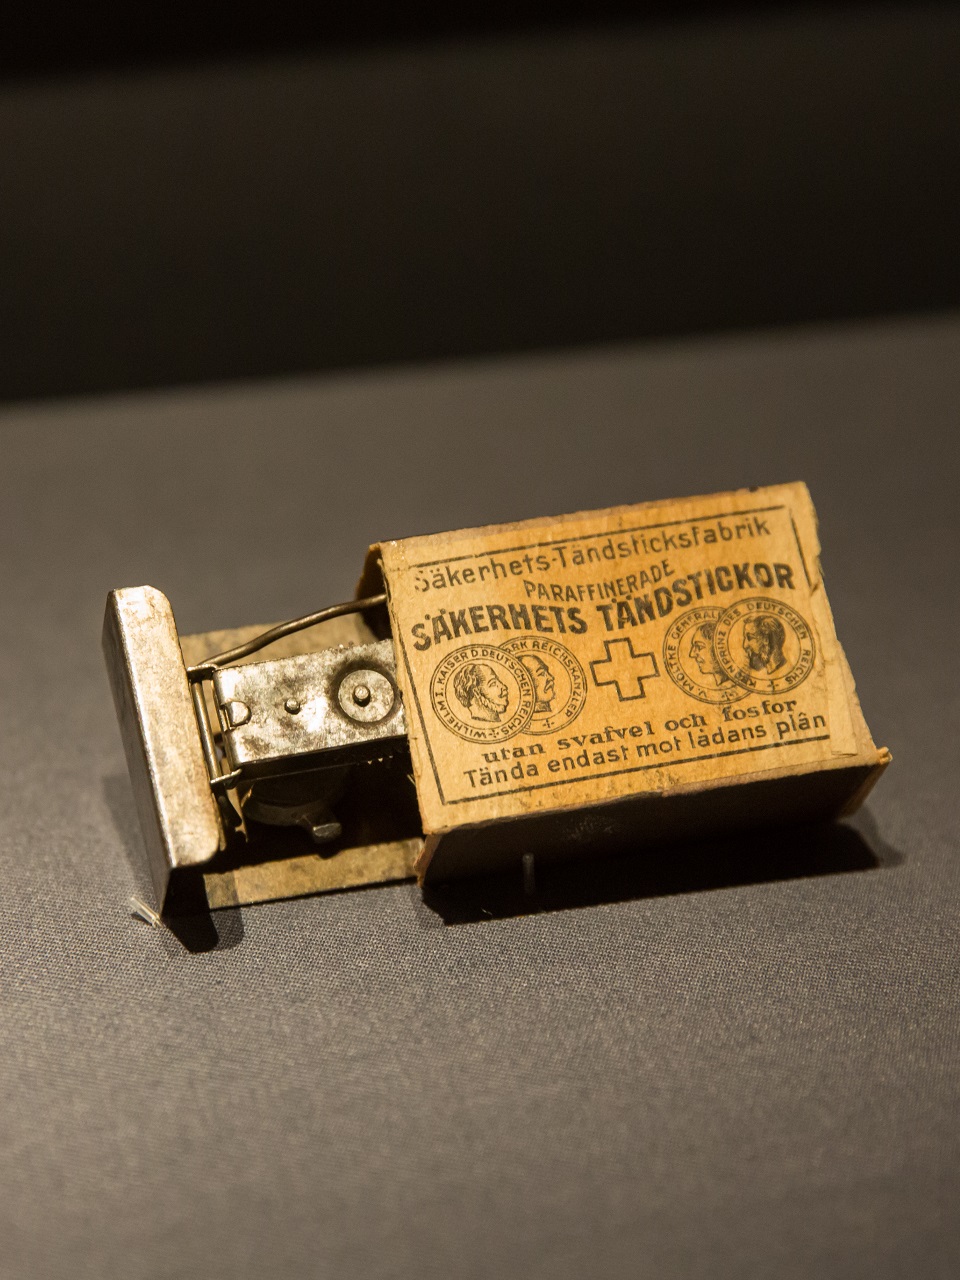 the morse code device in a matchbox used by prisoners to transmit messages, exhibited at changi museum singapore